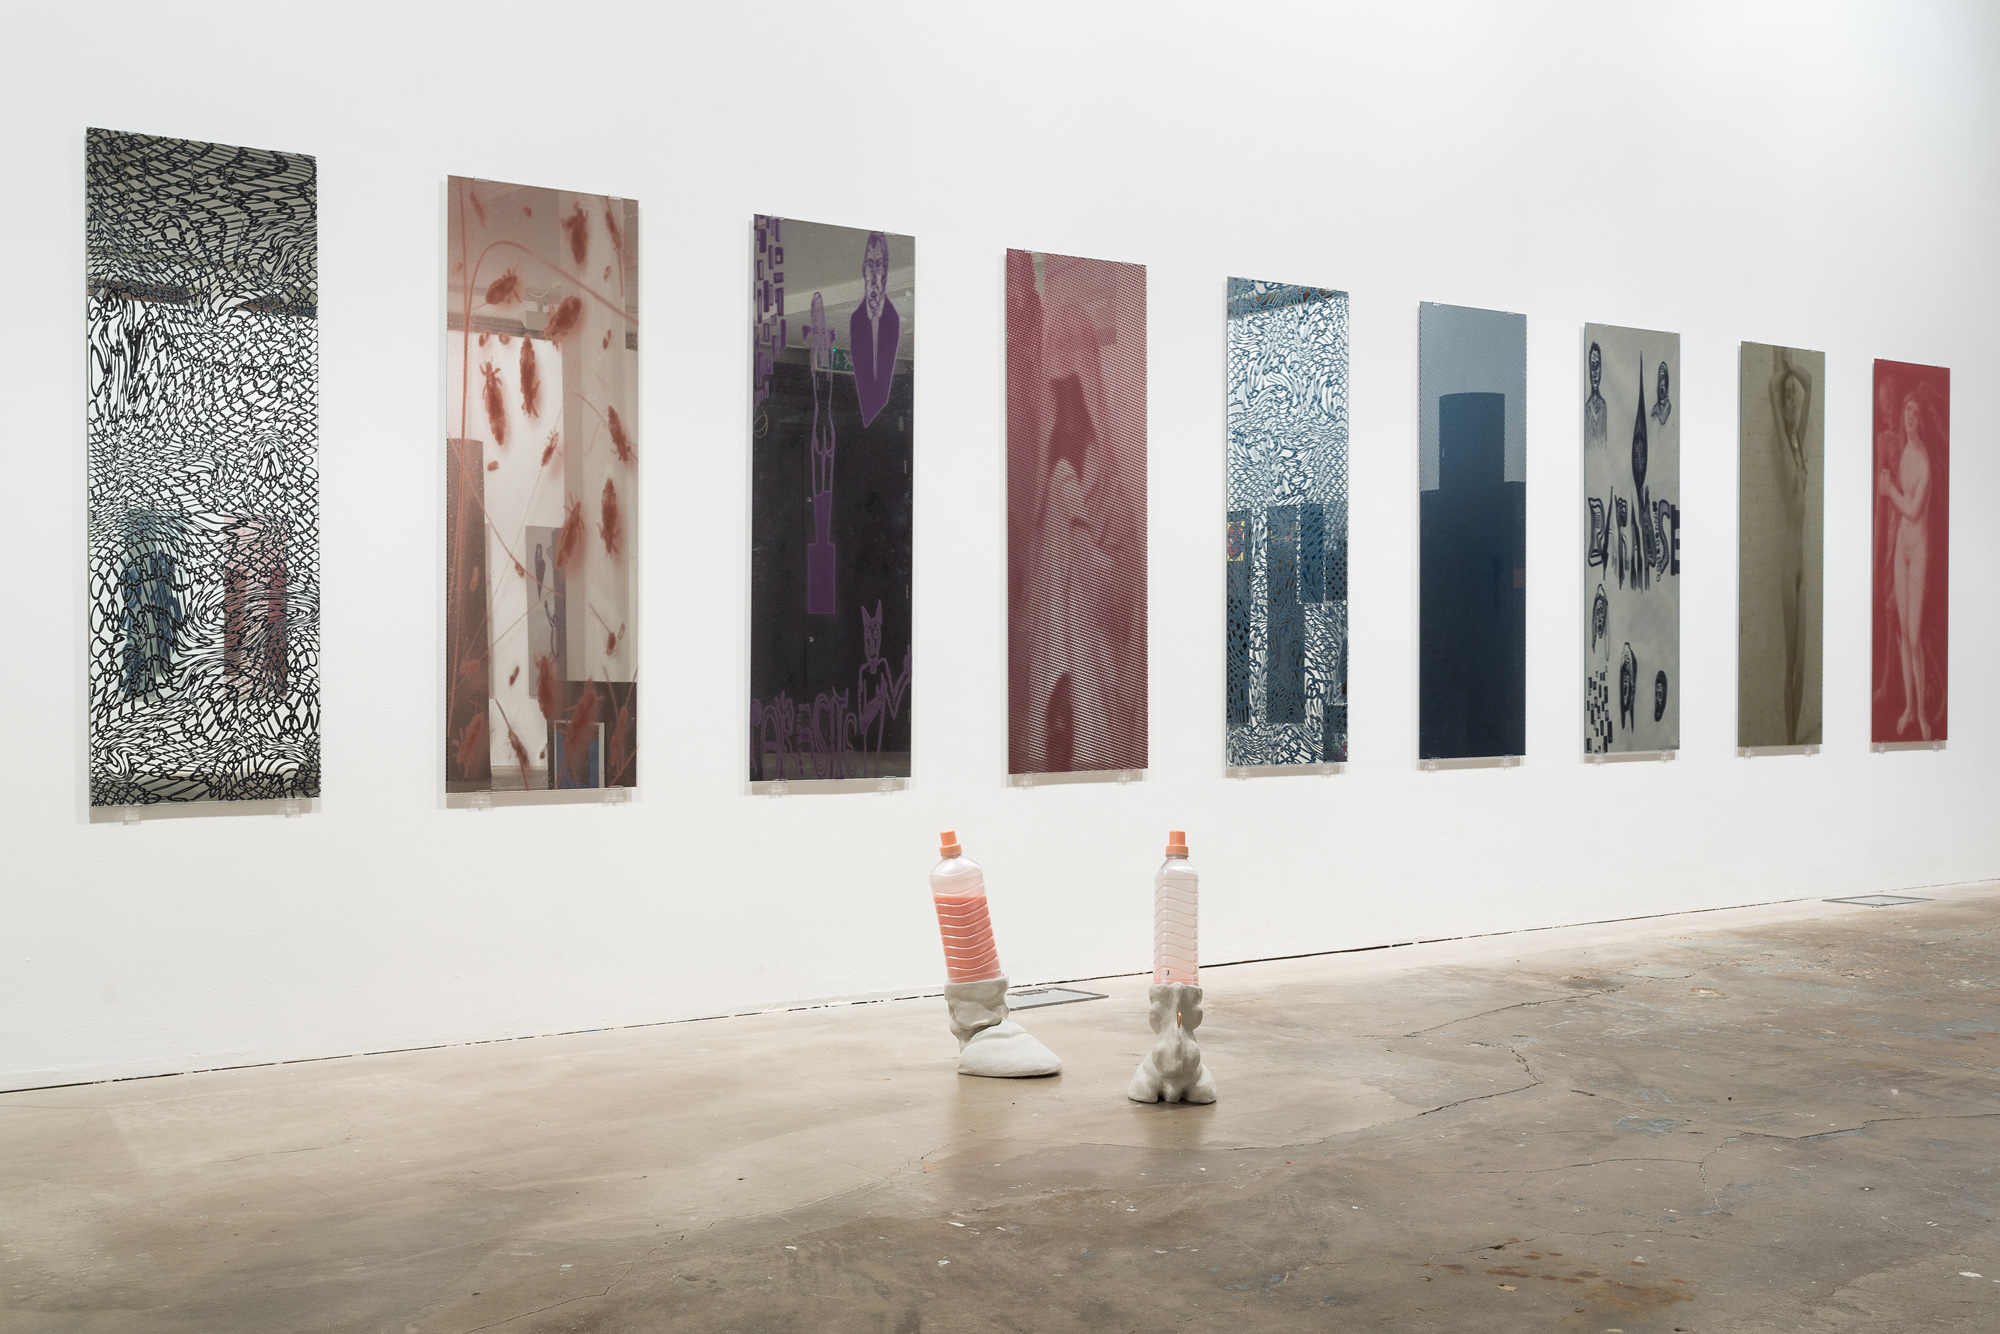 One step away from further Hell, 2015, Lena Henke and Marie Karlberg, Vilma Gold, London, installation view. One step away from further Hell
, Lena Henke and Marie Karlberg